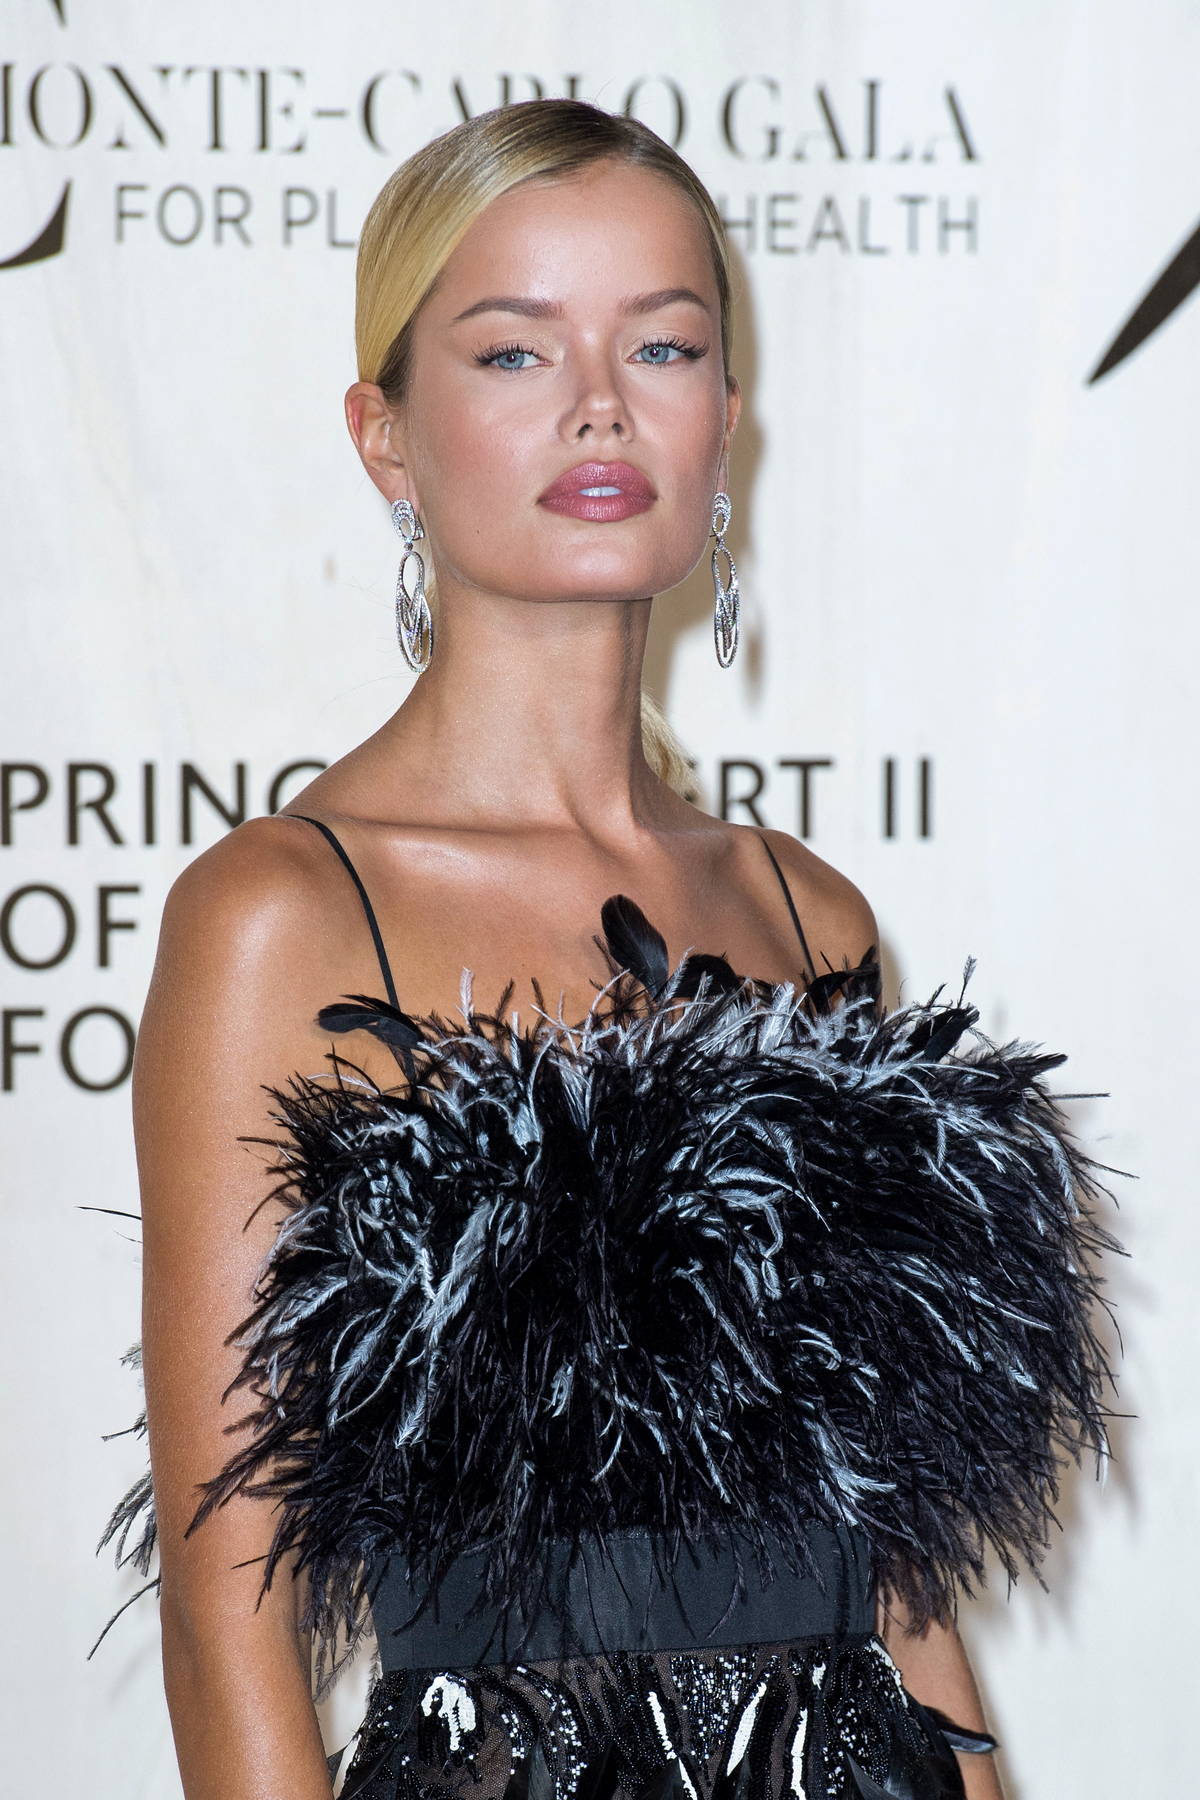 frida-aasen-attends-the-5th-monte-carlo-gala-for-planetary-health-in-monte-carlo-monaco-230921_12.jpg